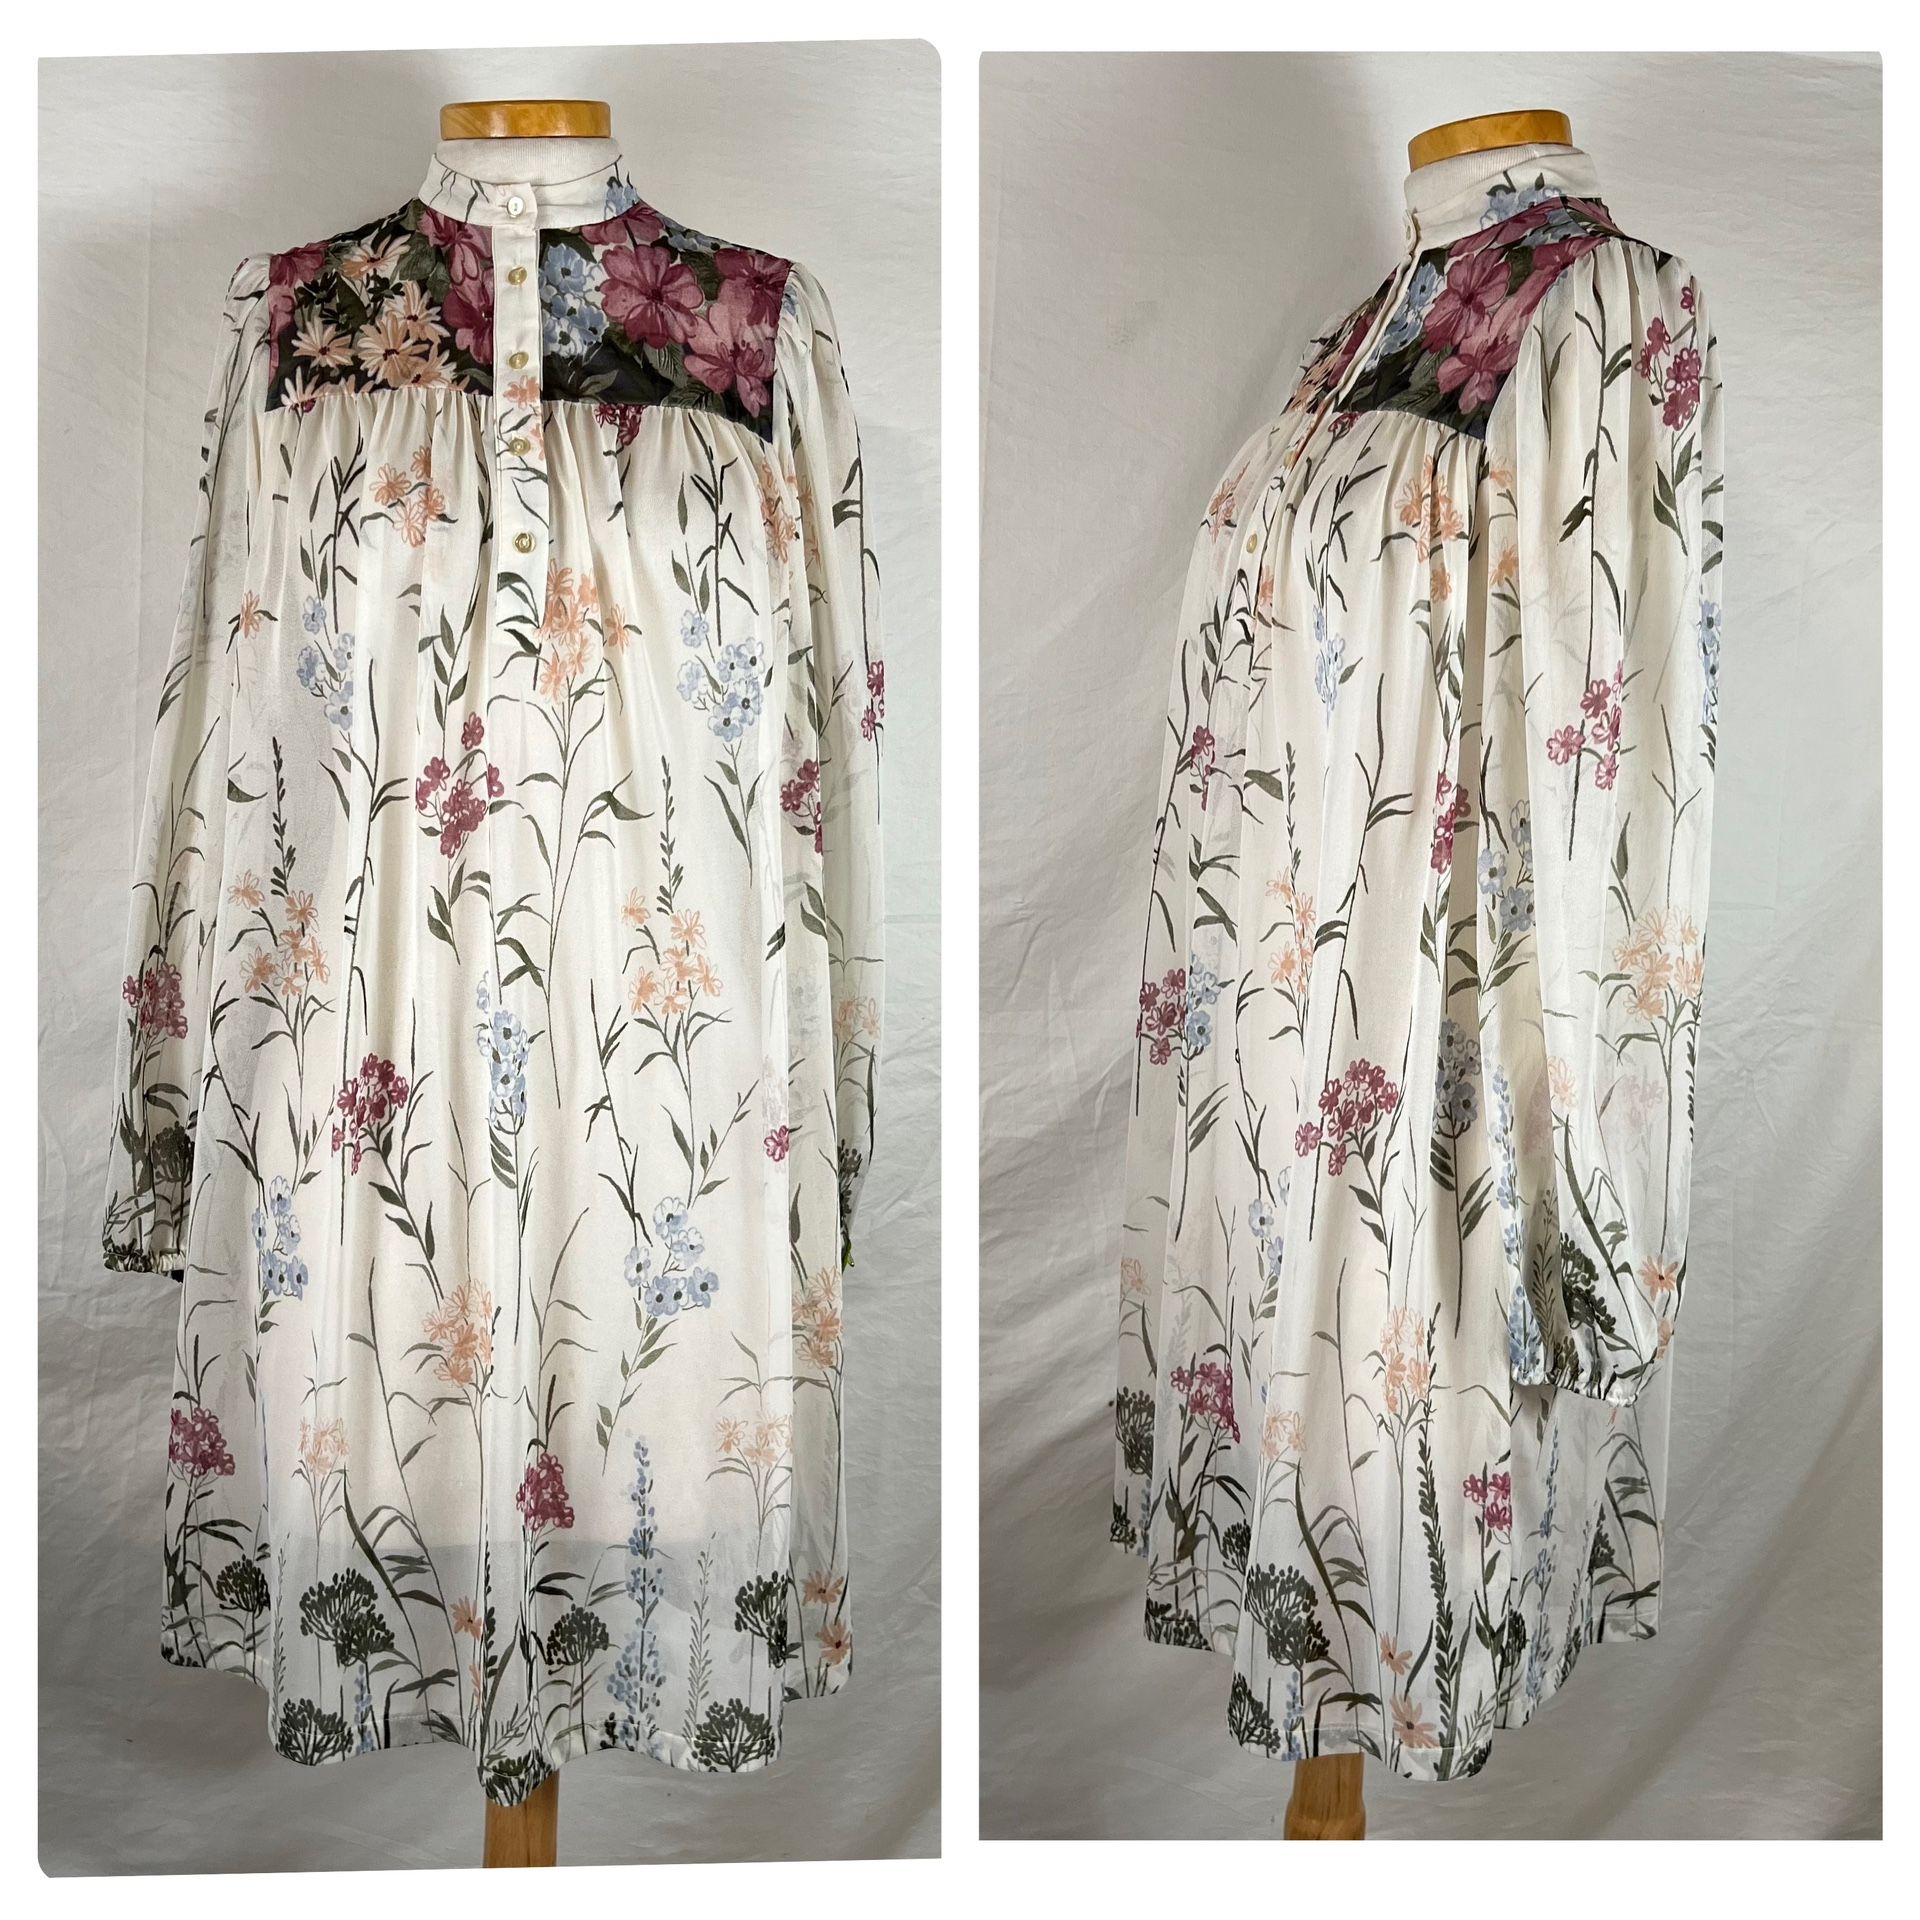 Vintage 90s JC Penney Short Sheer Floral Nightgown Chemise Long Sleeve Size S